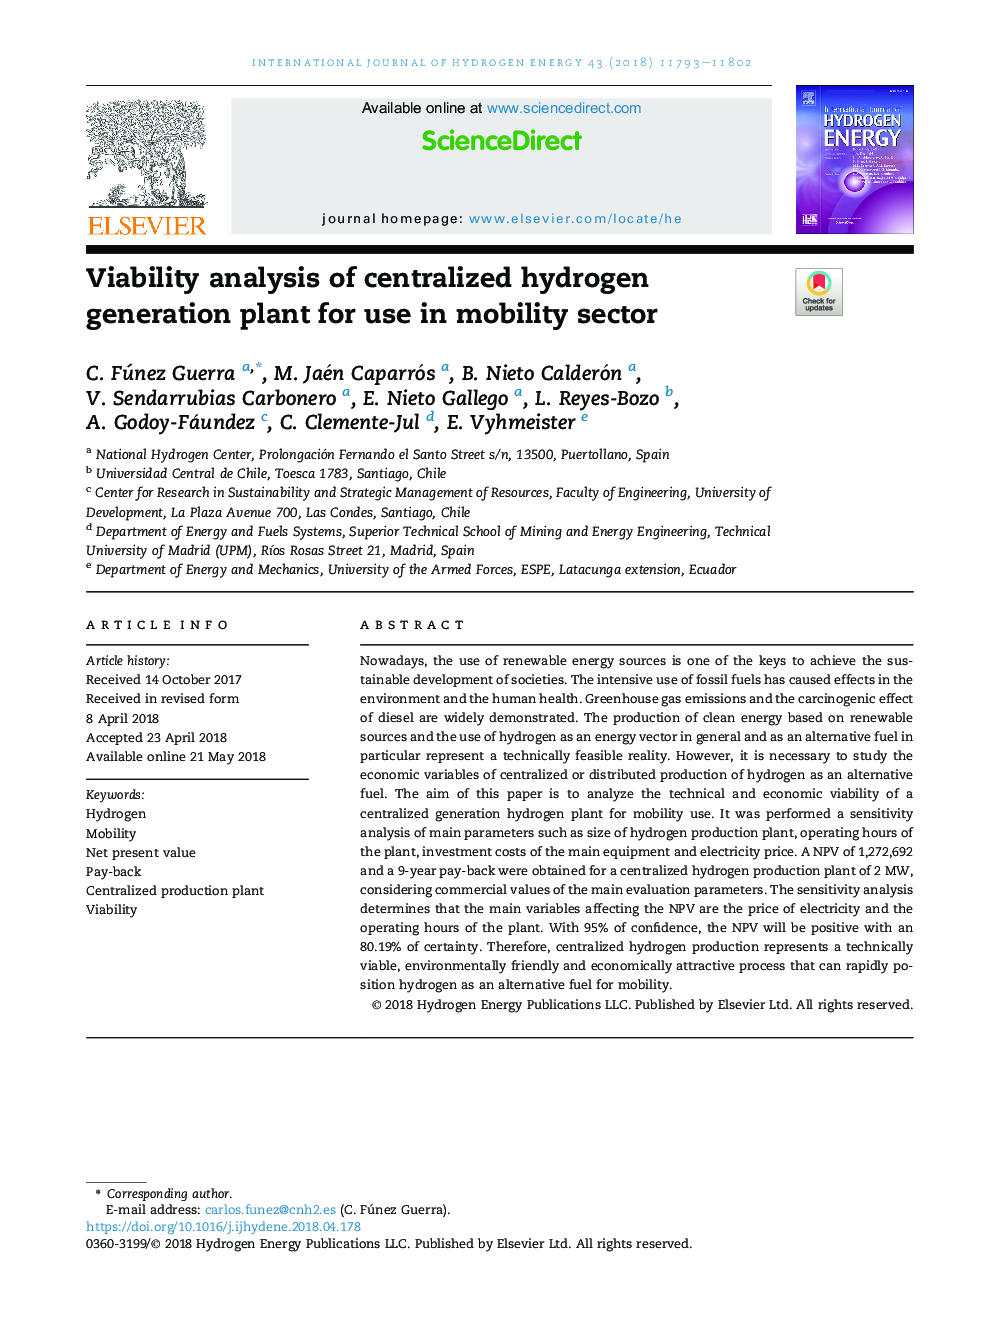 Viability analysis of centralized hydrogen generation plant for use in mobility sector